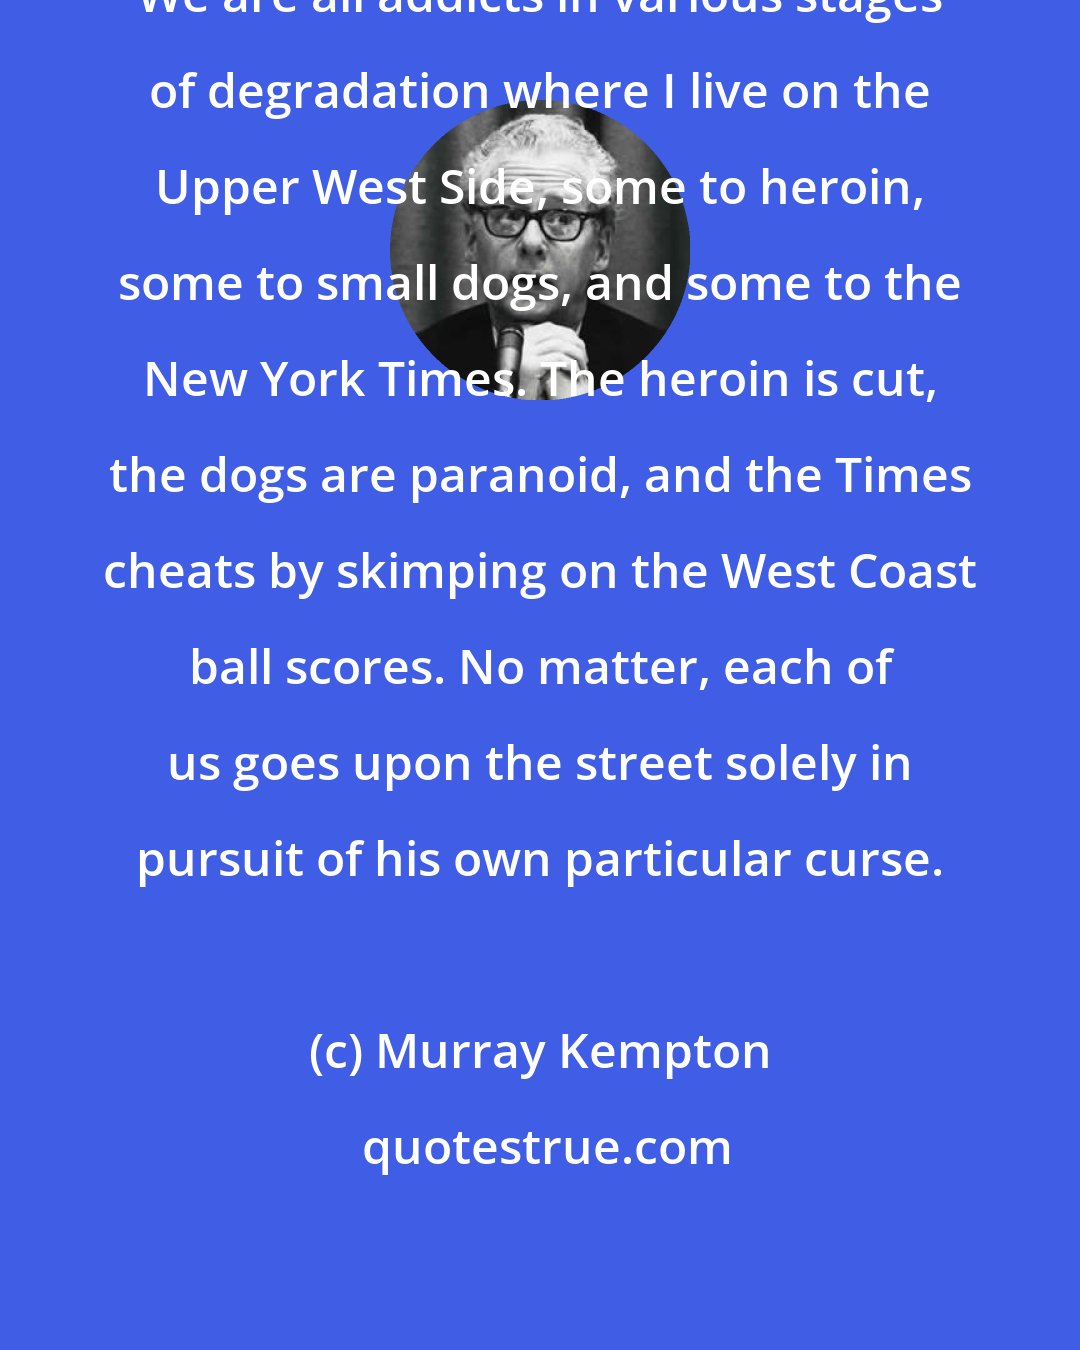 Murray Kempton: We are all addicts in various stages of degradation where I live on the Upper West Side, some to heroin, some to small dogs, and some to the New York Times. The heroin is cut, the dogs are paranoid, and the Times cheats by skimping on the West Coast ball scores. No matter, each of us goes upon the street solely in pursuit of his own particular curse.